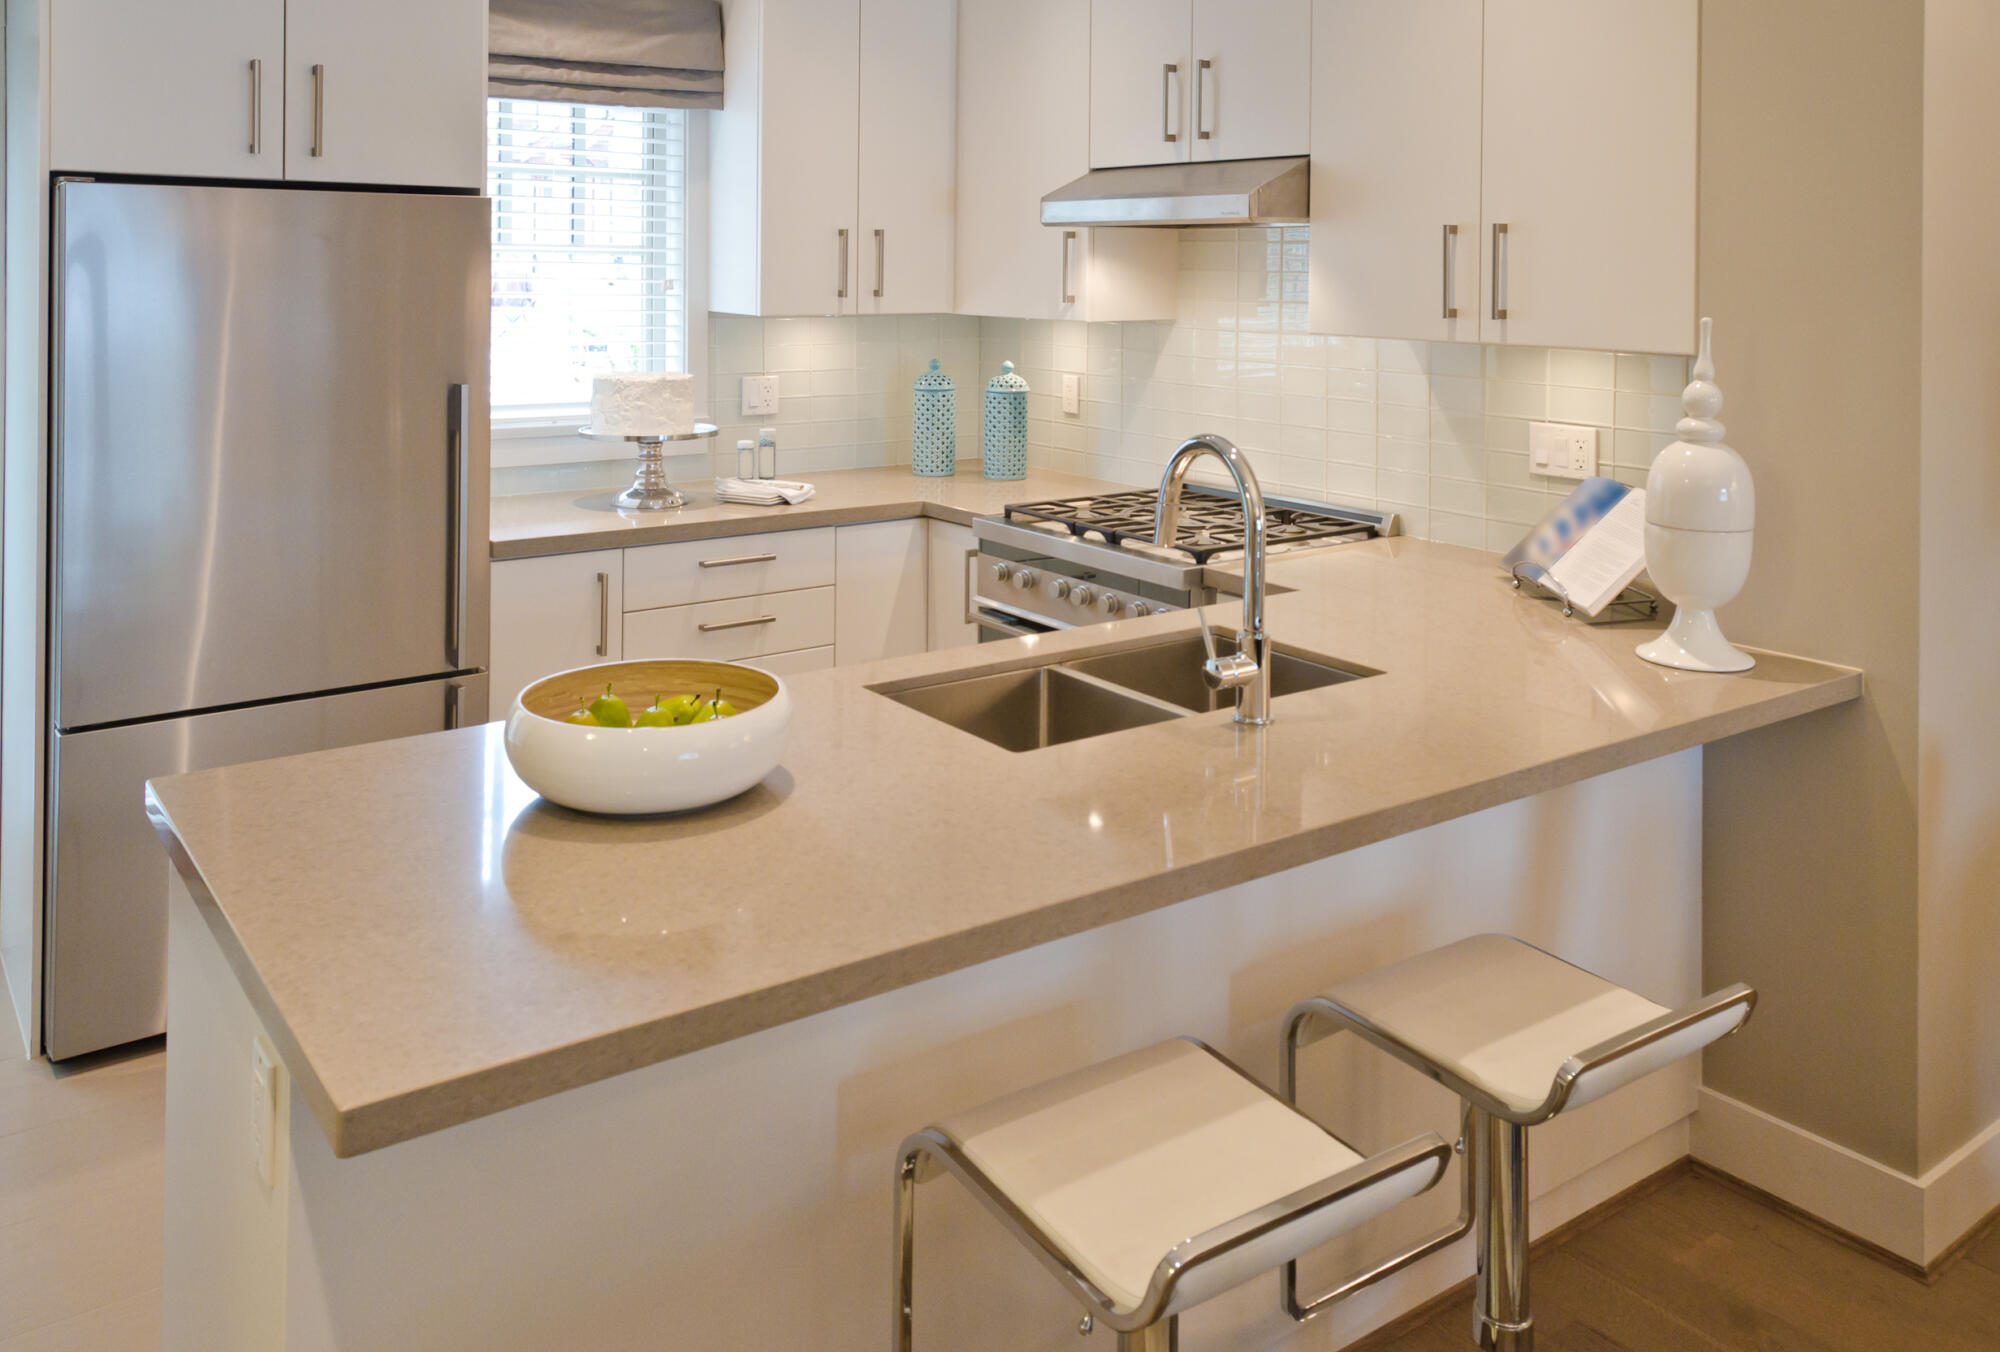 A white kitchen with stainless steel appliances and a kitchen peninsula.